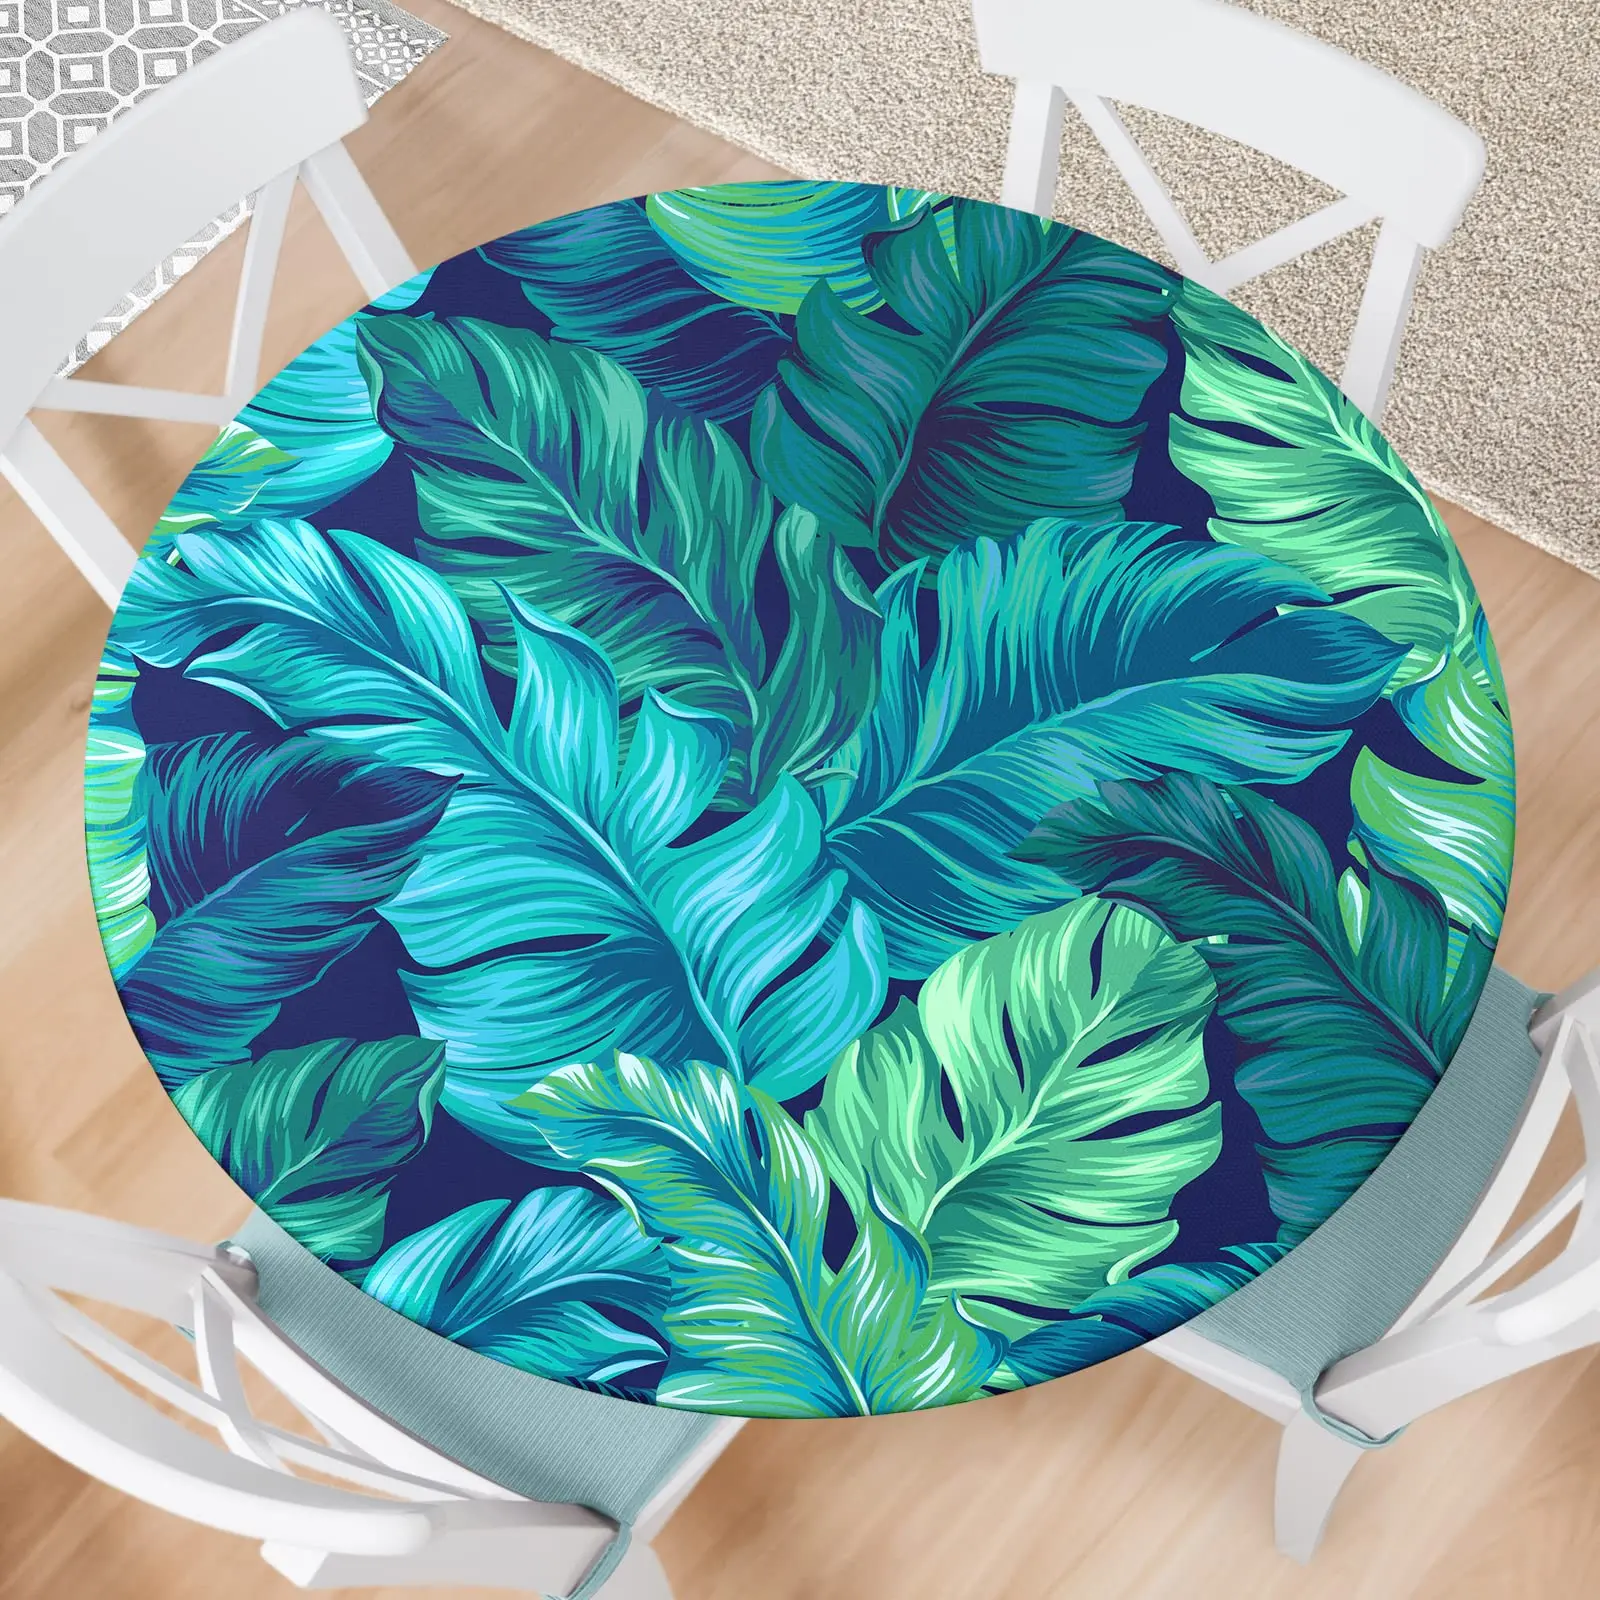 

Green Tropical Leaves Round Tablecloth Fitted Elastic Palm Leaf Tablecloths Waterproof Reusable Round Table Cover for Kitchen